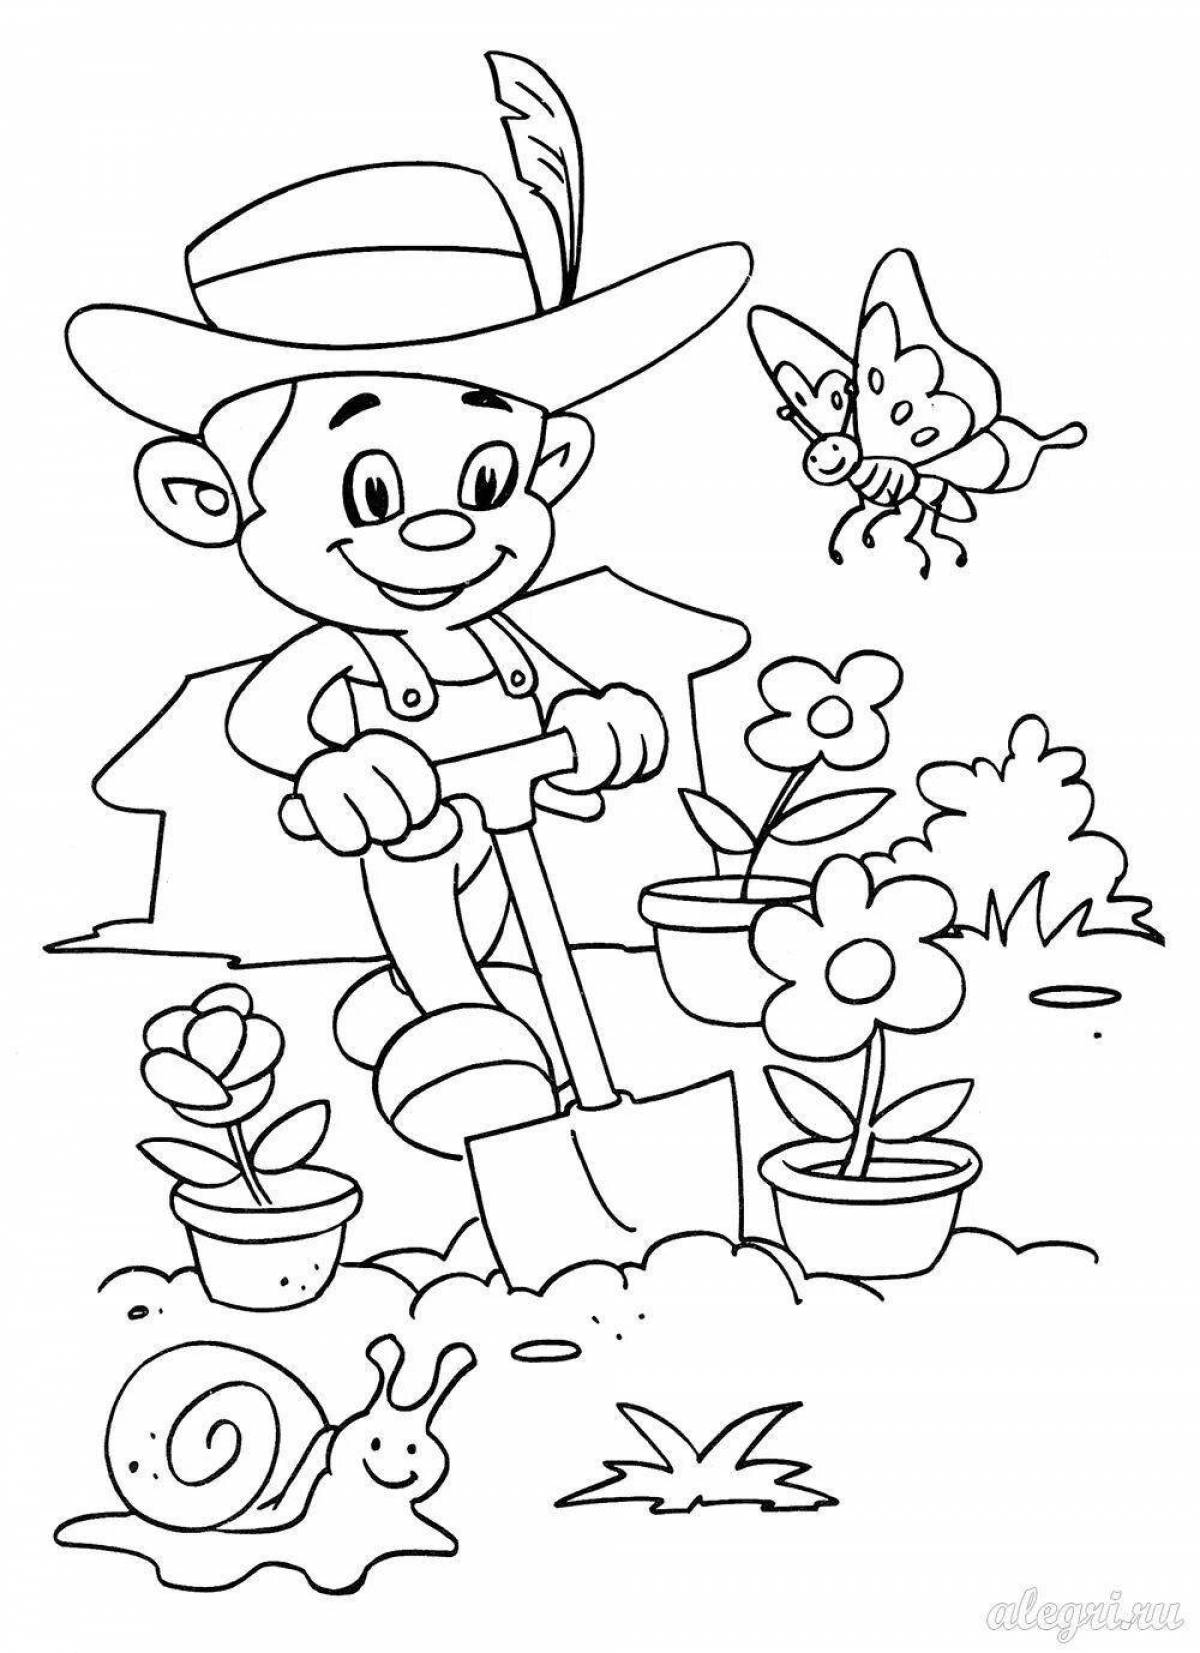 Colourful gardener coloring pages for kids